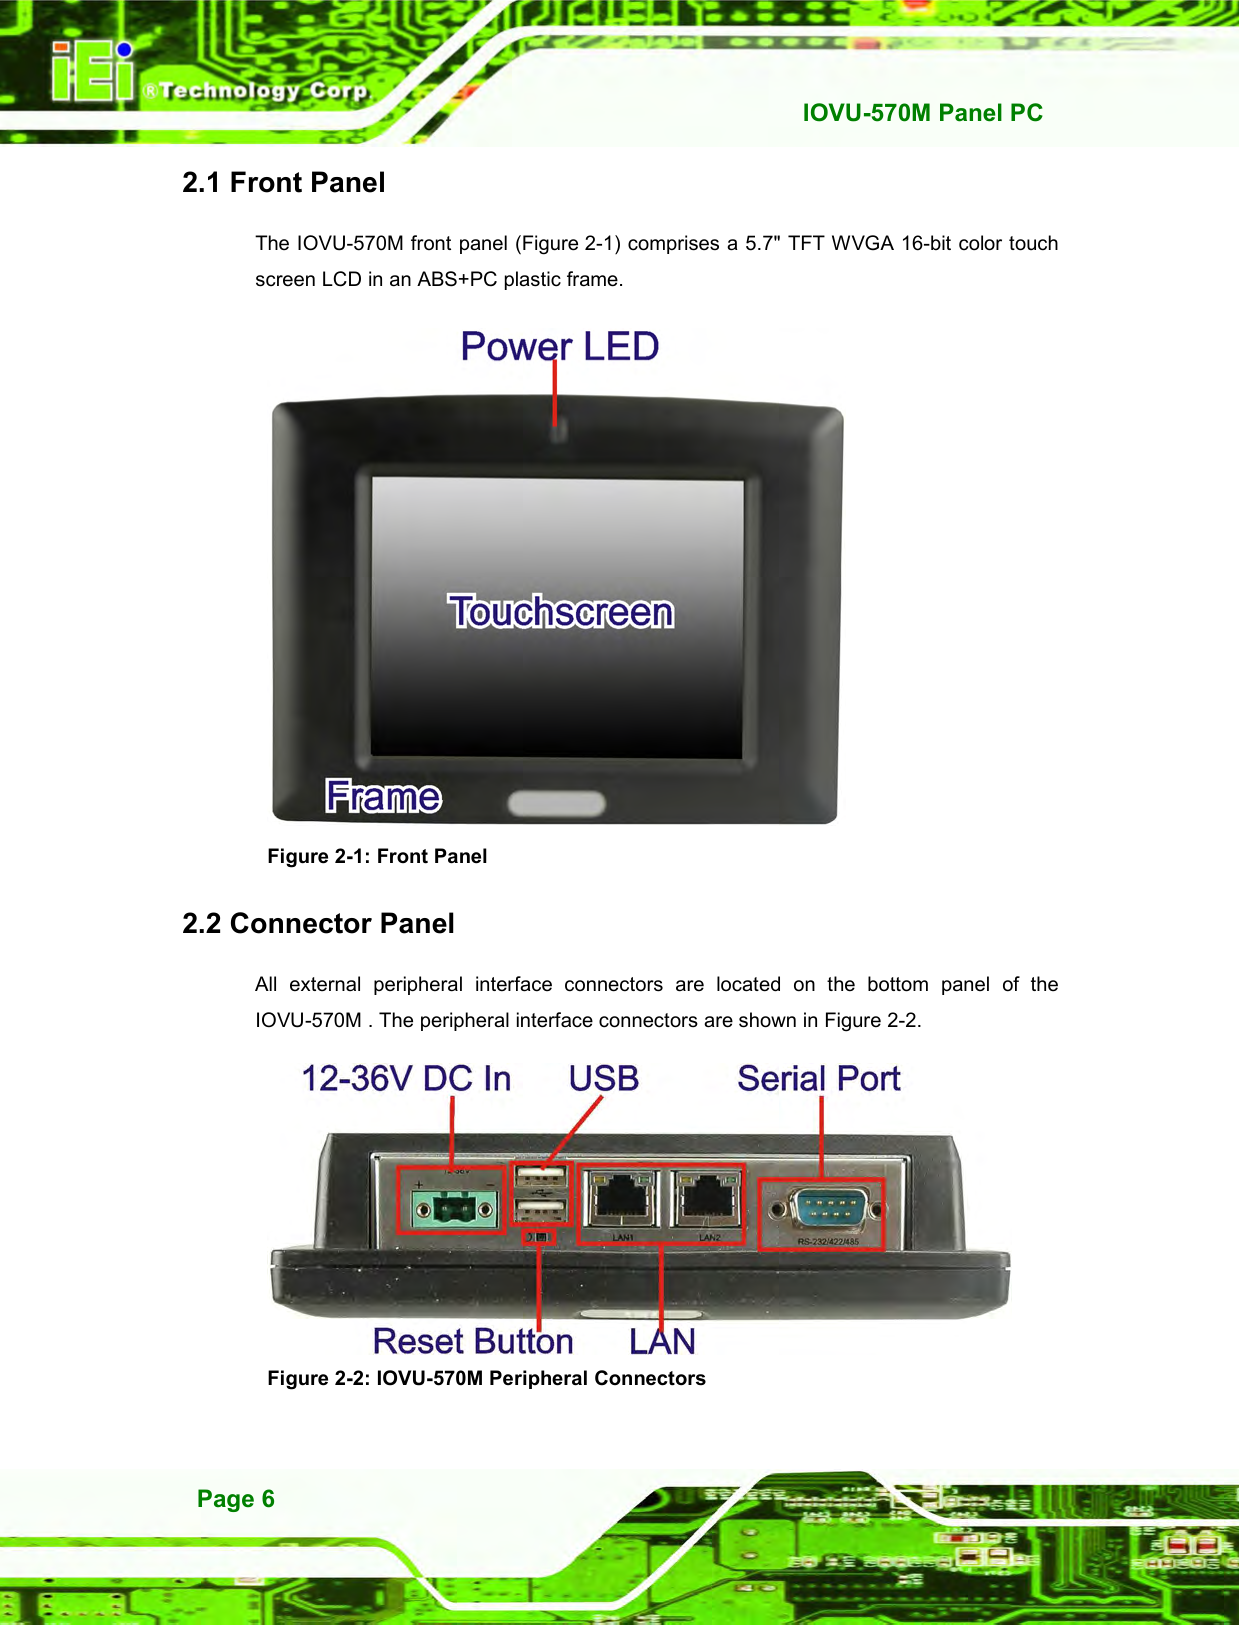   IOVU-570M Panel PC Page 6 2.1 Front Panel The IOVU-570M front panel (Figure 2-1) comprises a 5.7&quot; TFT WVGA 16-bit color touch screen LCD in an ABS+PC plastic frame.  Figure 2-1: Front Panel 2.2 Connector Panel All  external  peripheral  interface  connectors  are  located  on  the  bottom  panel  of  the IOVU-570M . The peripheral interface connectors are shown in Figure 2-2.  Figure 2-2: IOVU-570M Peripheral Connectors 